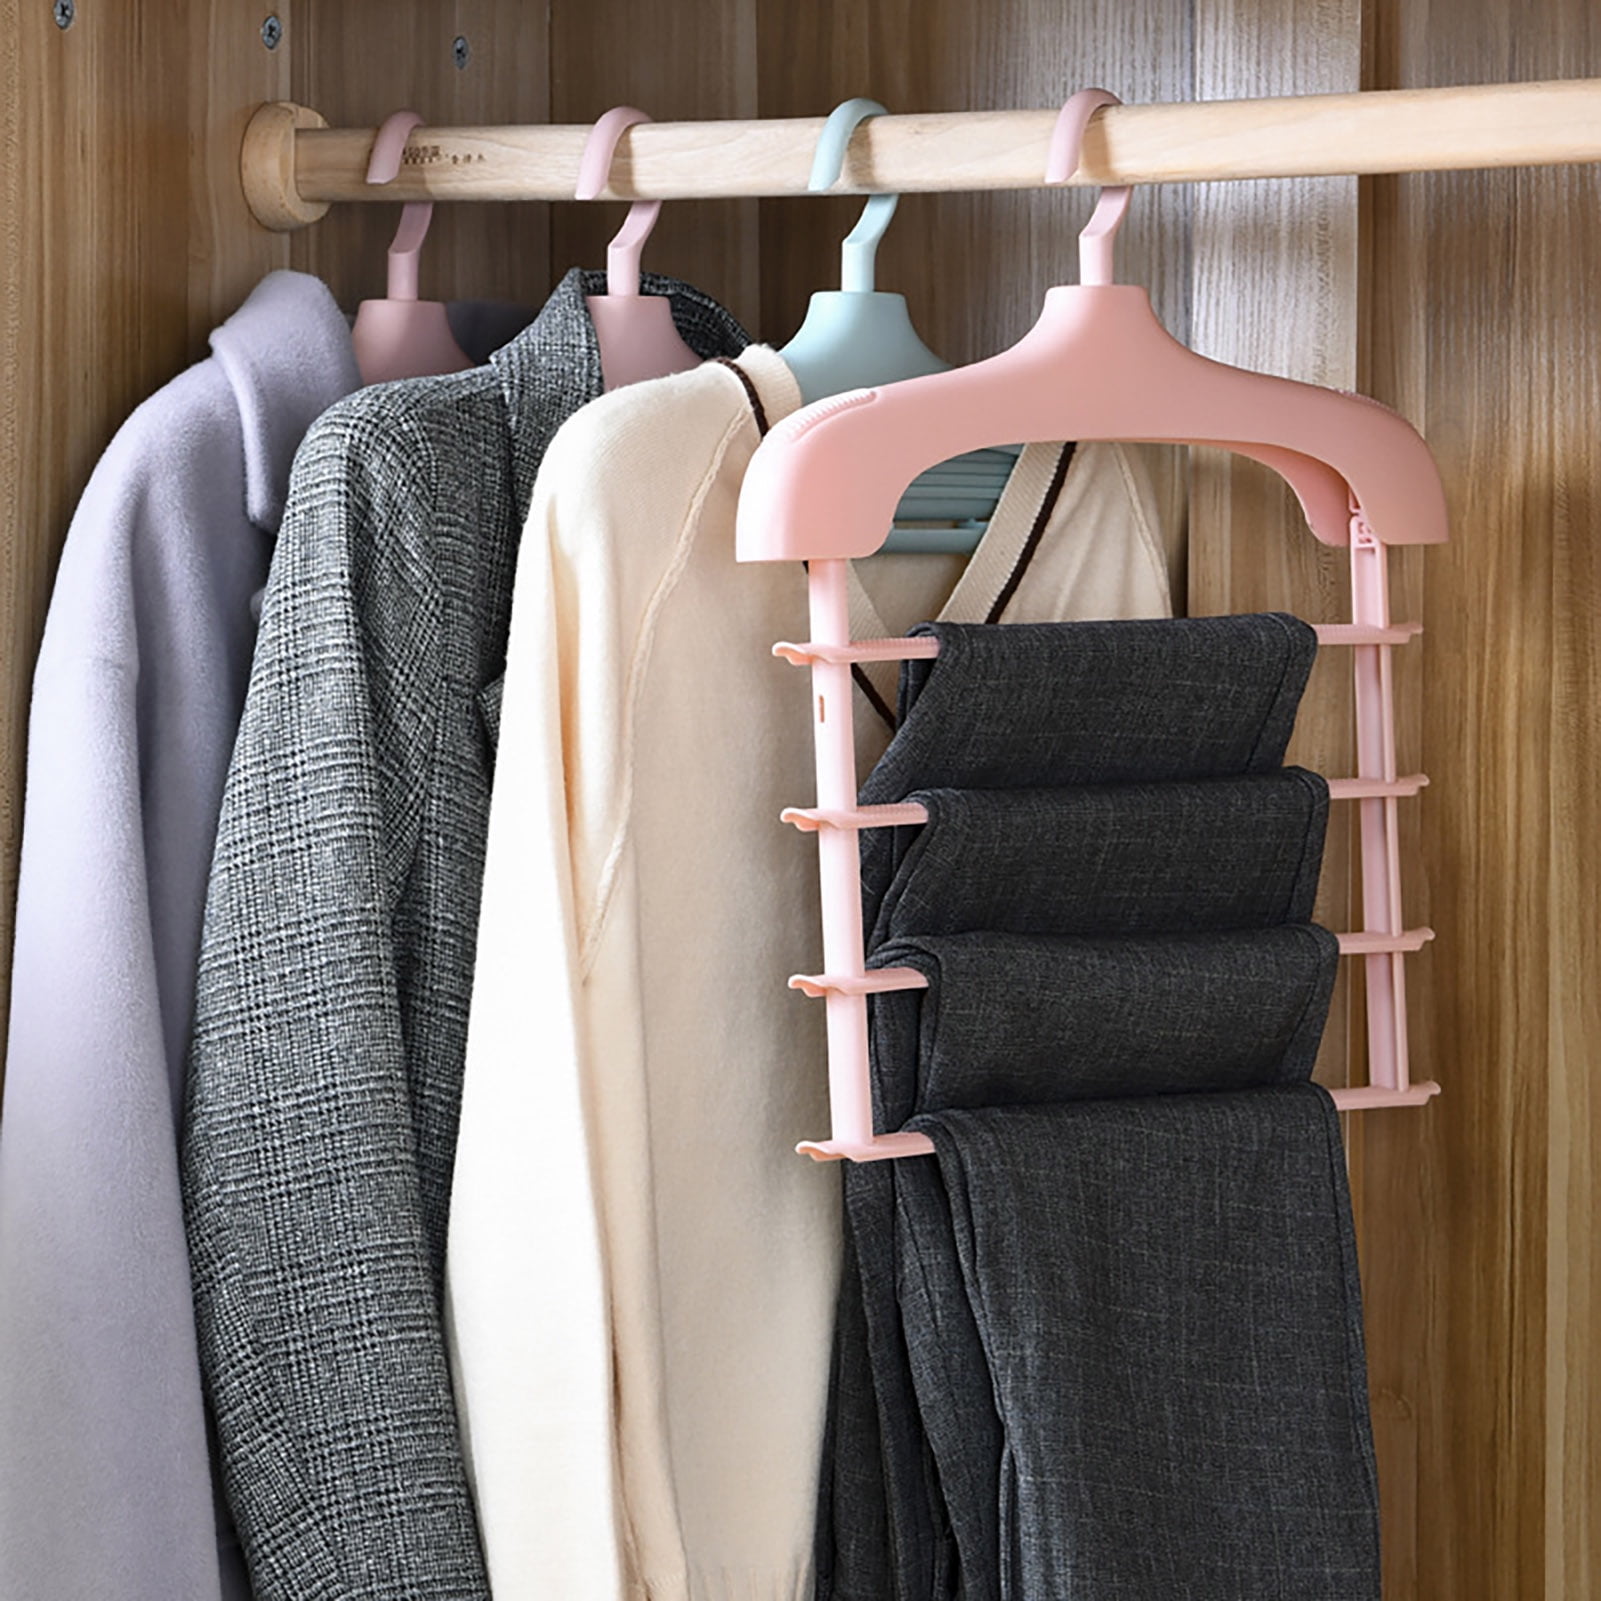 Details about   Home S Type Multi Functional Clothing Hanger Rack & Storage Essentials Organizer 